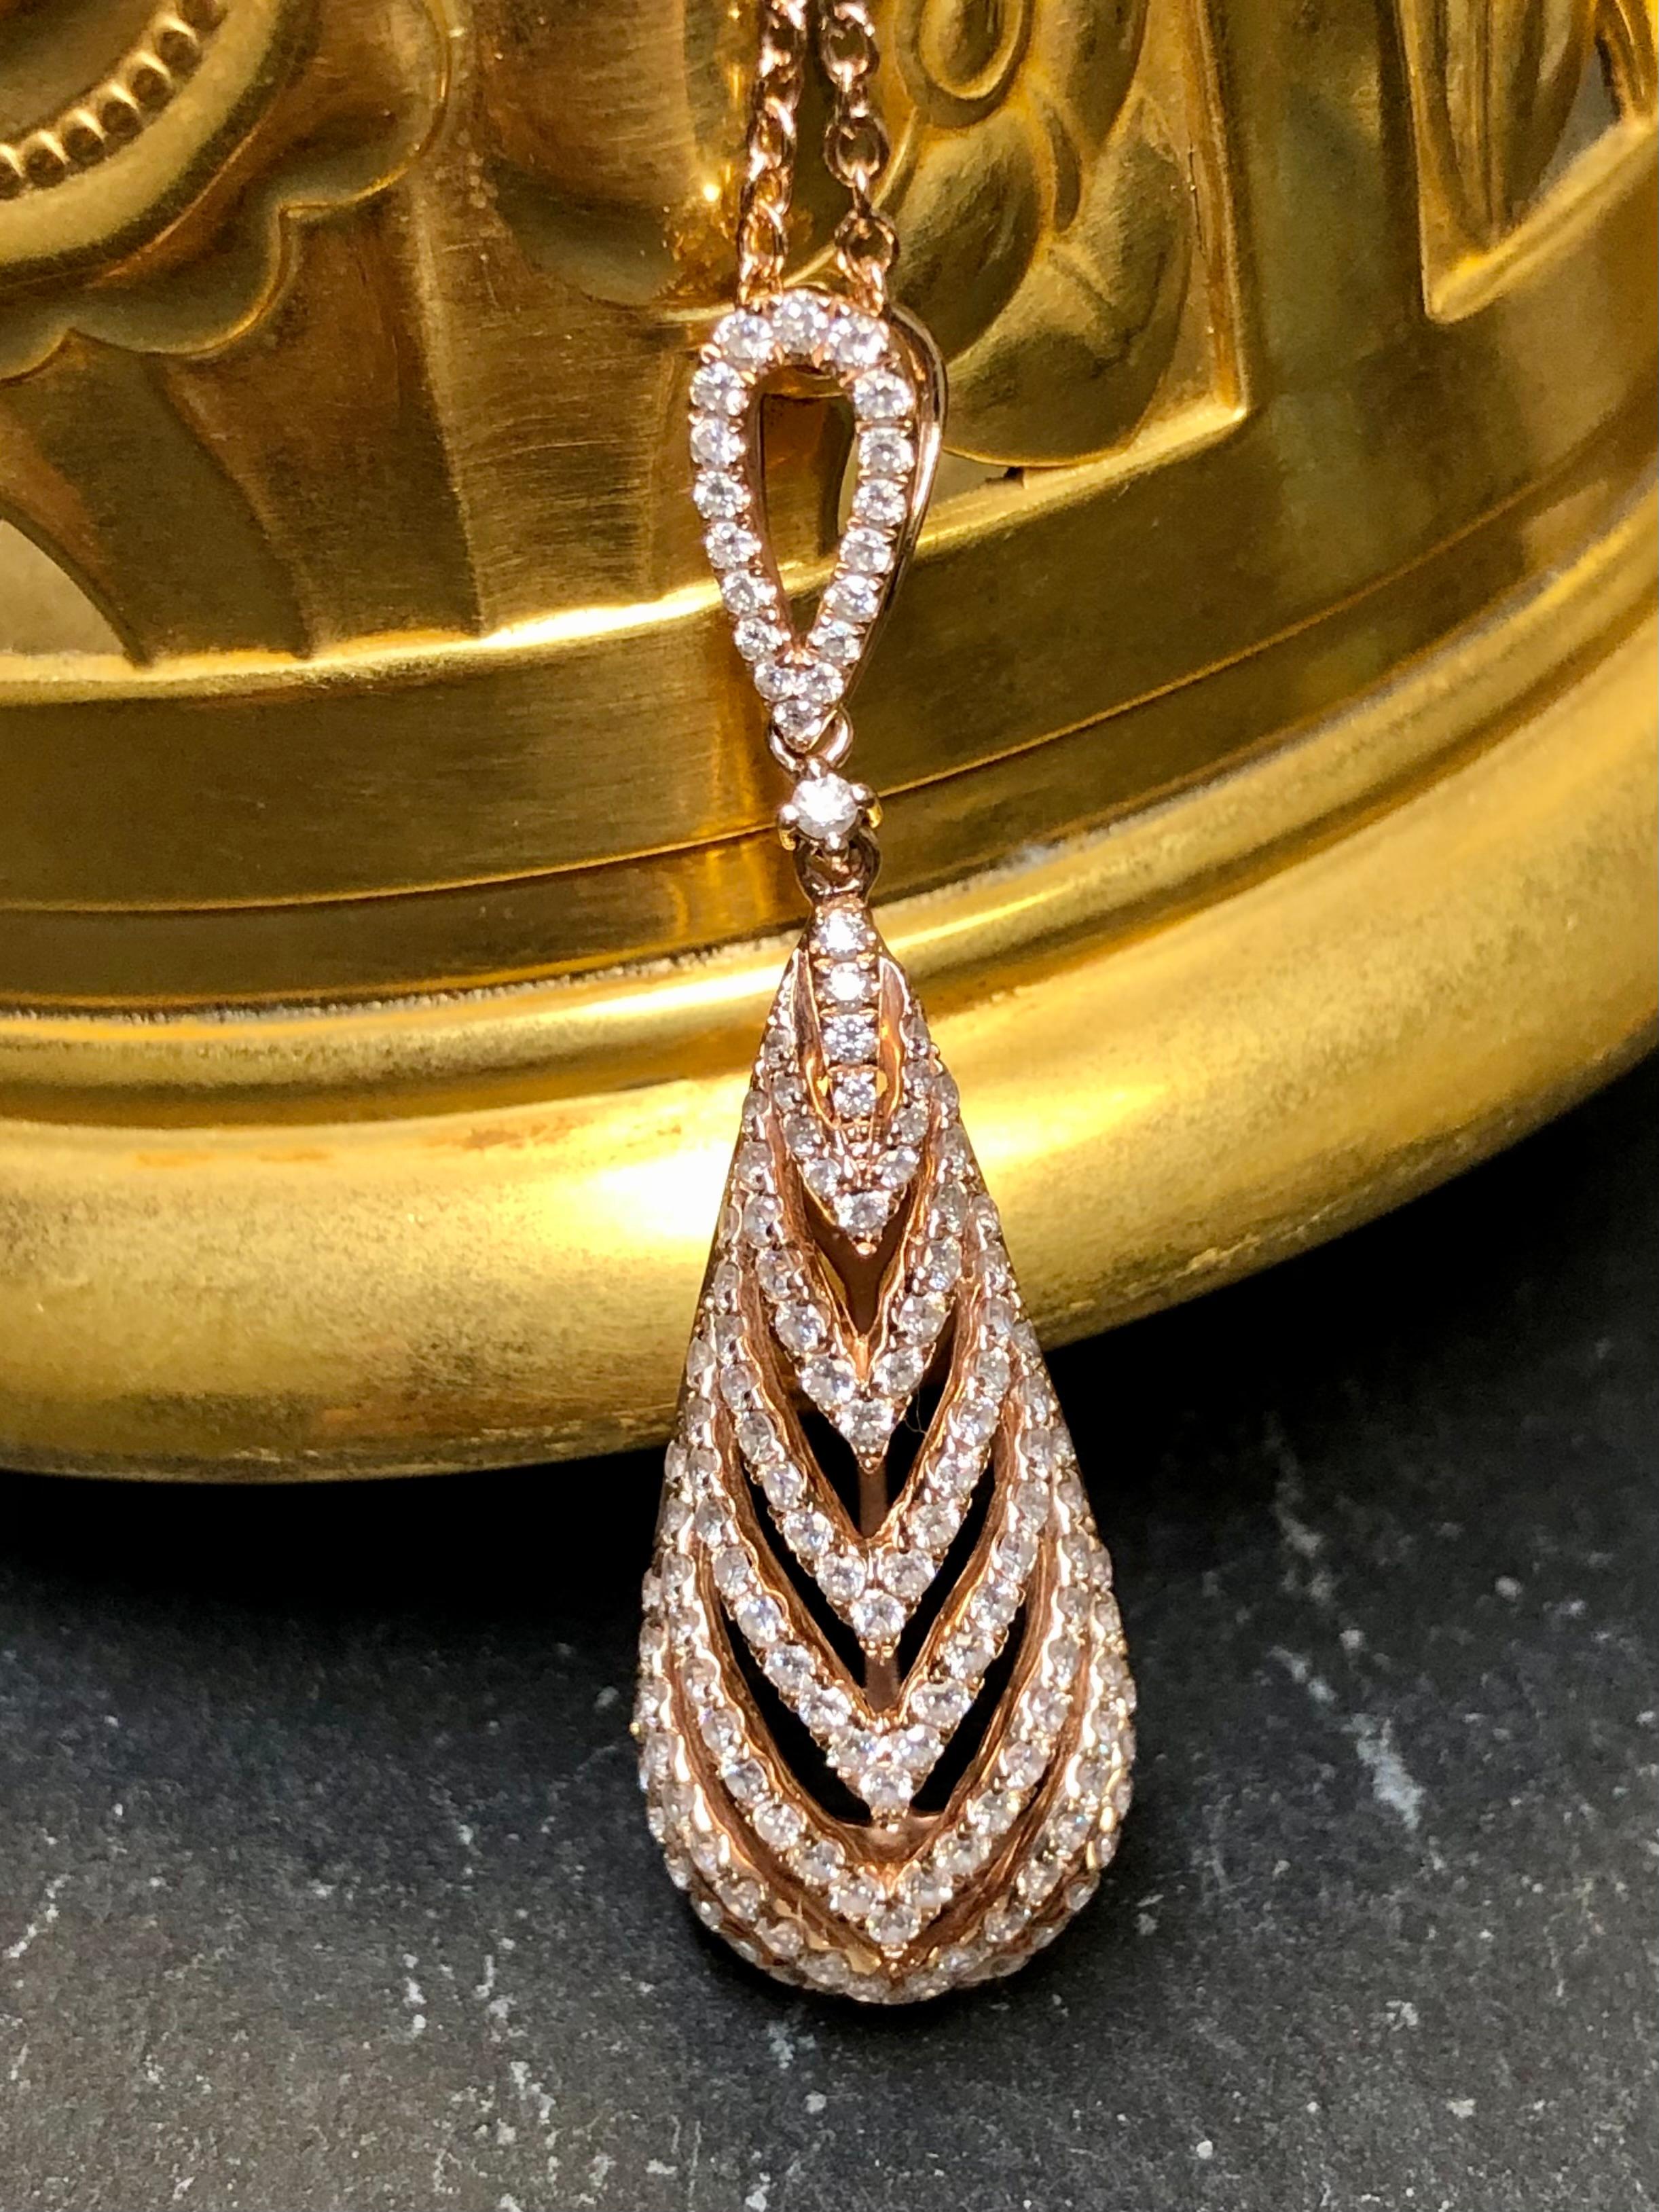 
A striking pendant done in 14K rose gold set with approximately 1.85cttw in G-I color Vs2-Si1 clarity round diamonds. The chain that accompanies it is a “diamonds-by-the-yard” style and can be worn at 16”, 17” or 18”